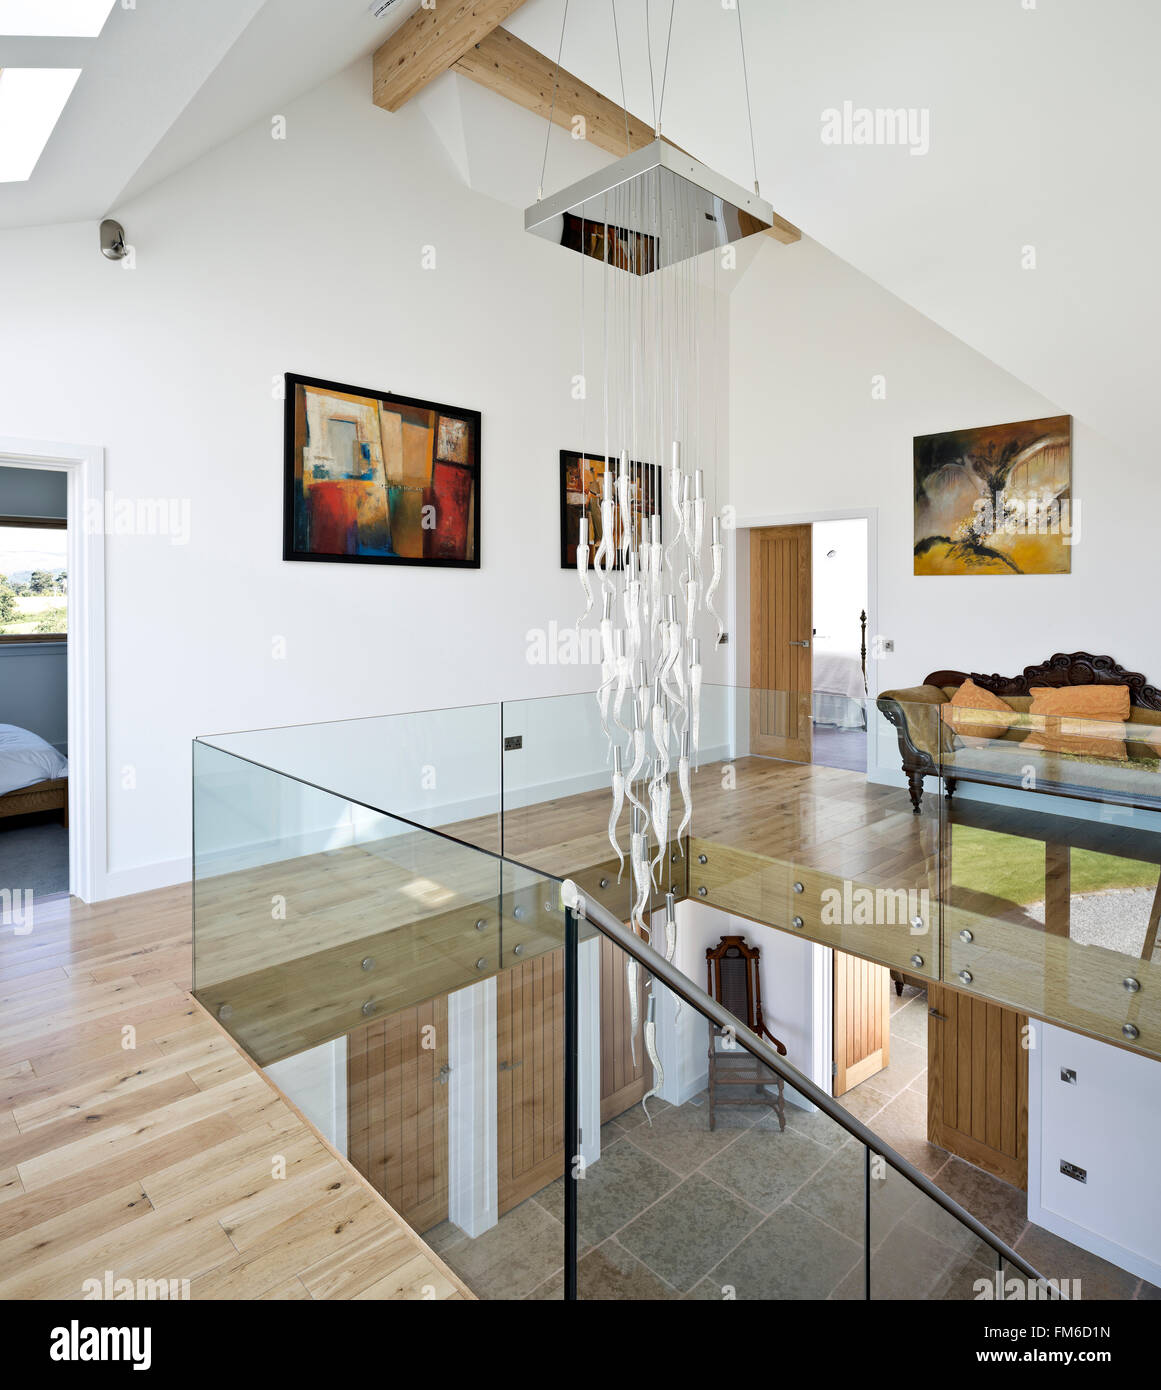 An interior view of a modern residential property called the Amor House, in Gleneagles, showing the landing and some furnishings. Stock Photo